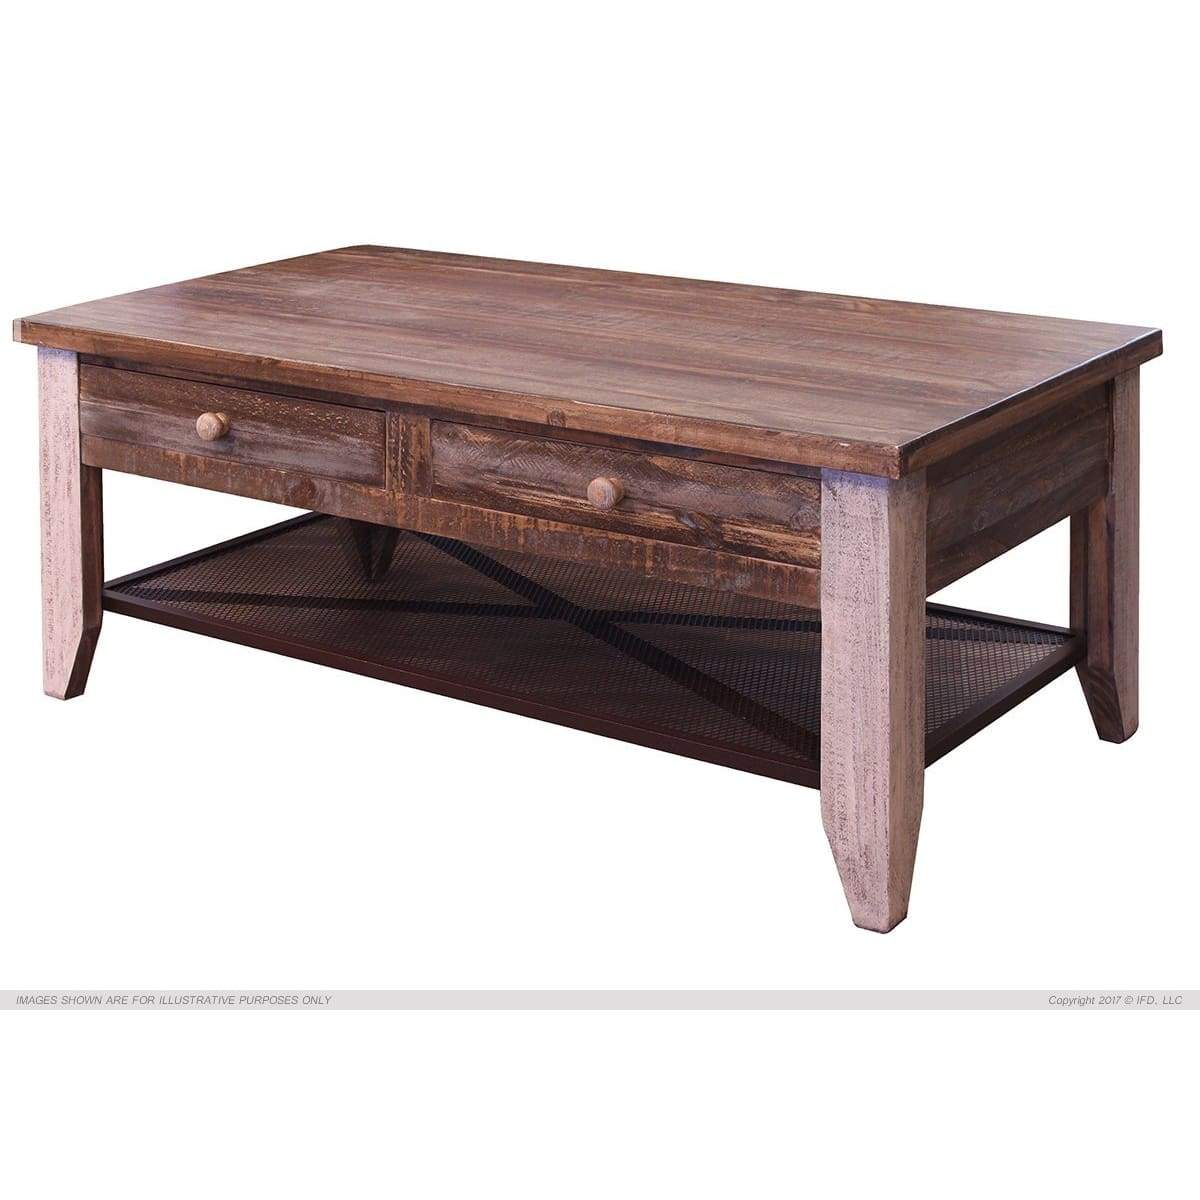 Antique Regular Coffee Table - COFFEE TABLE